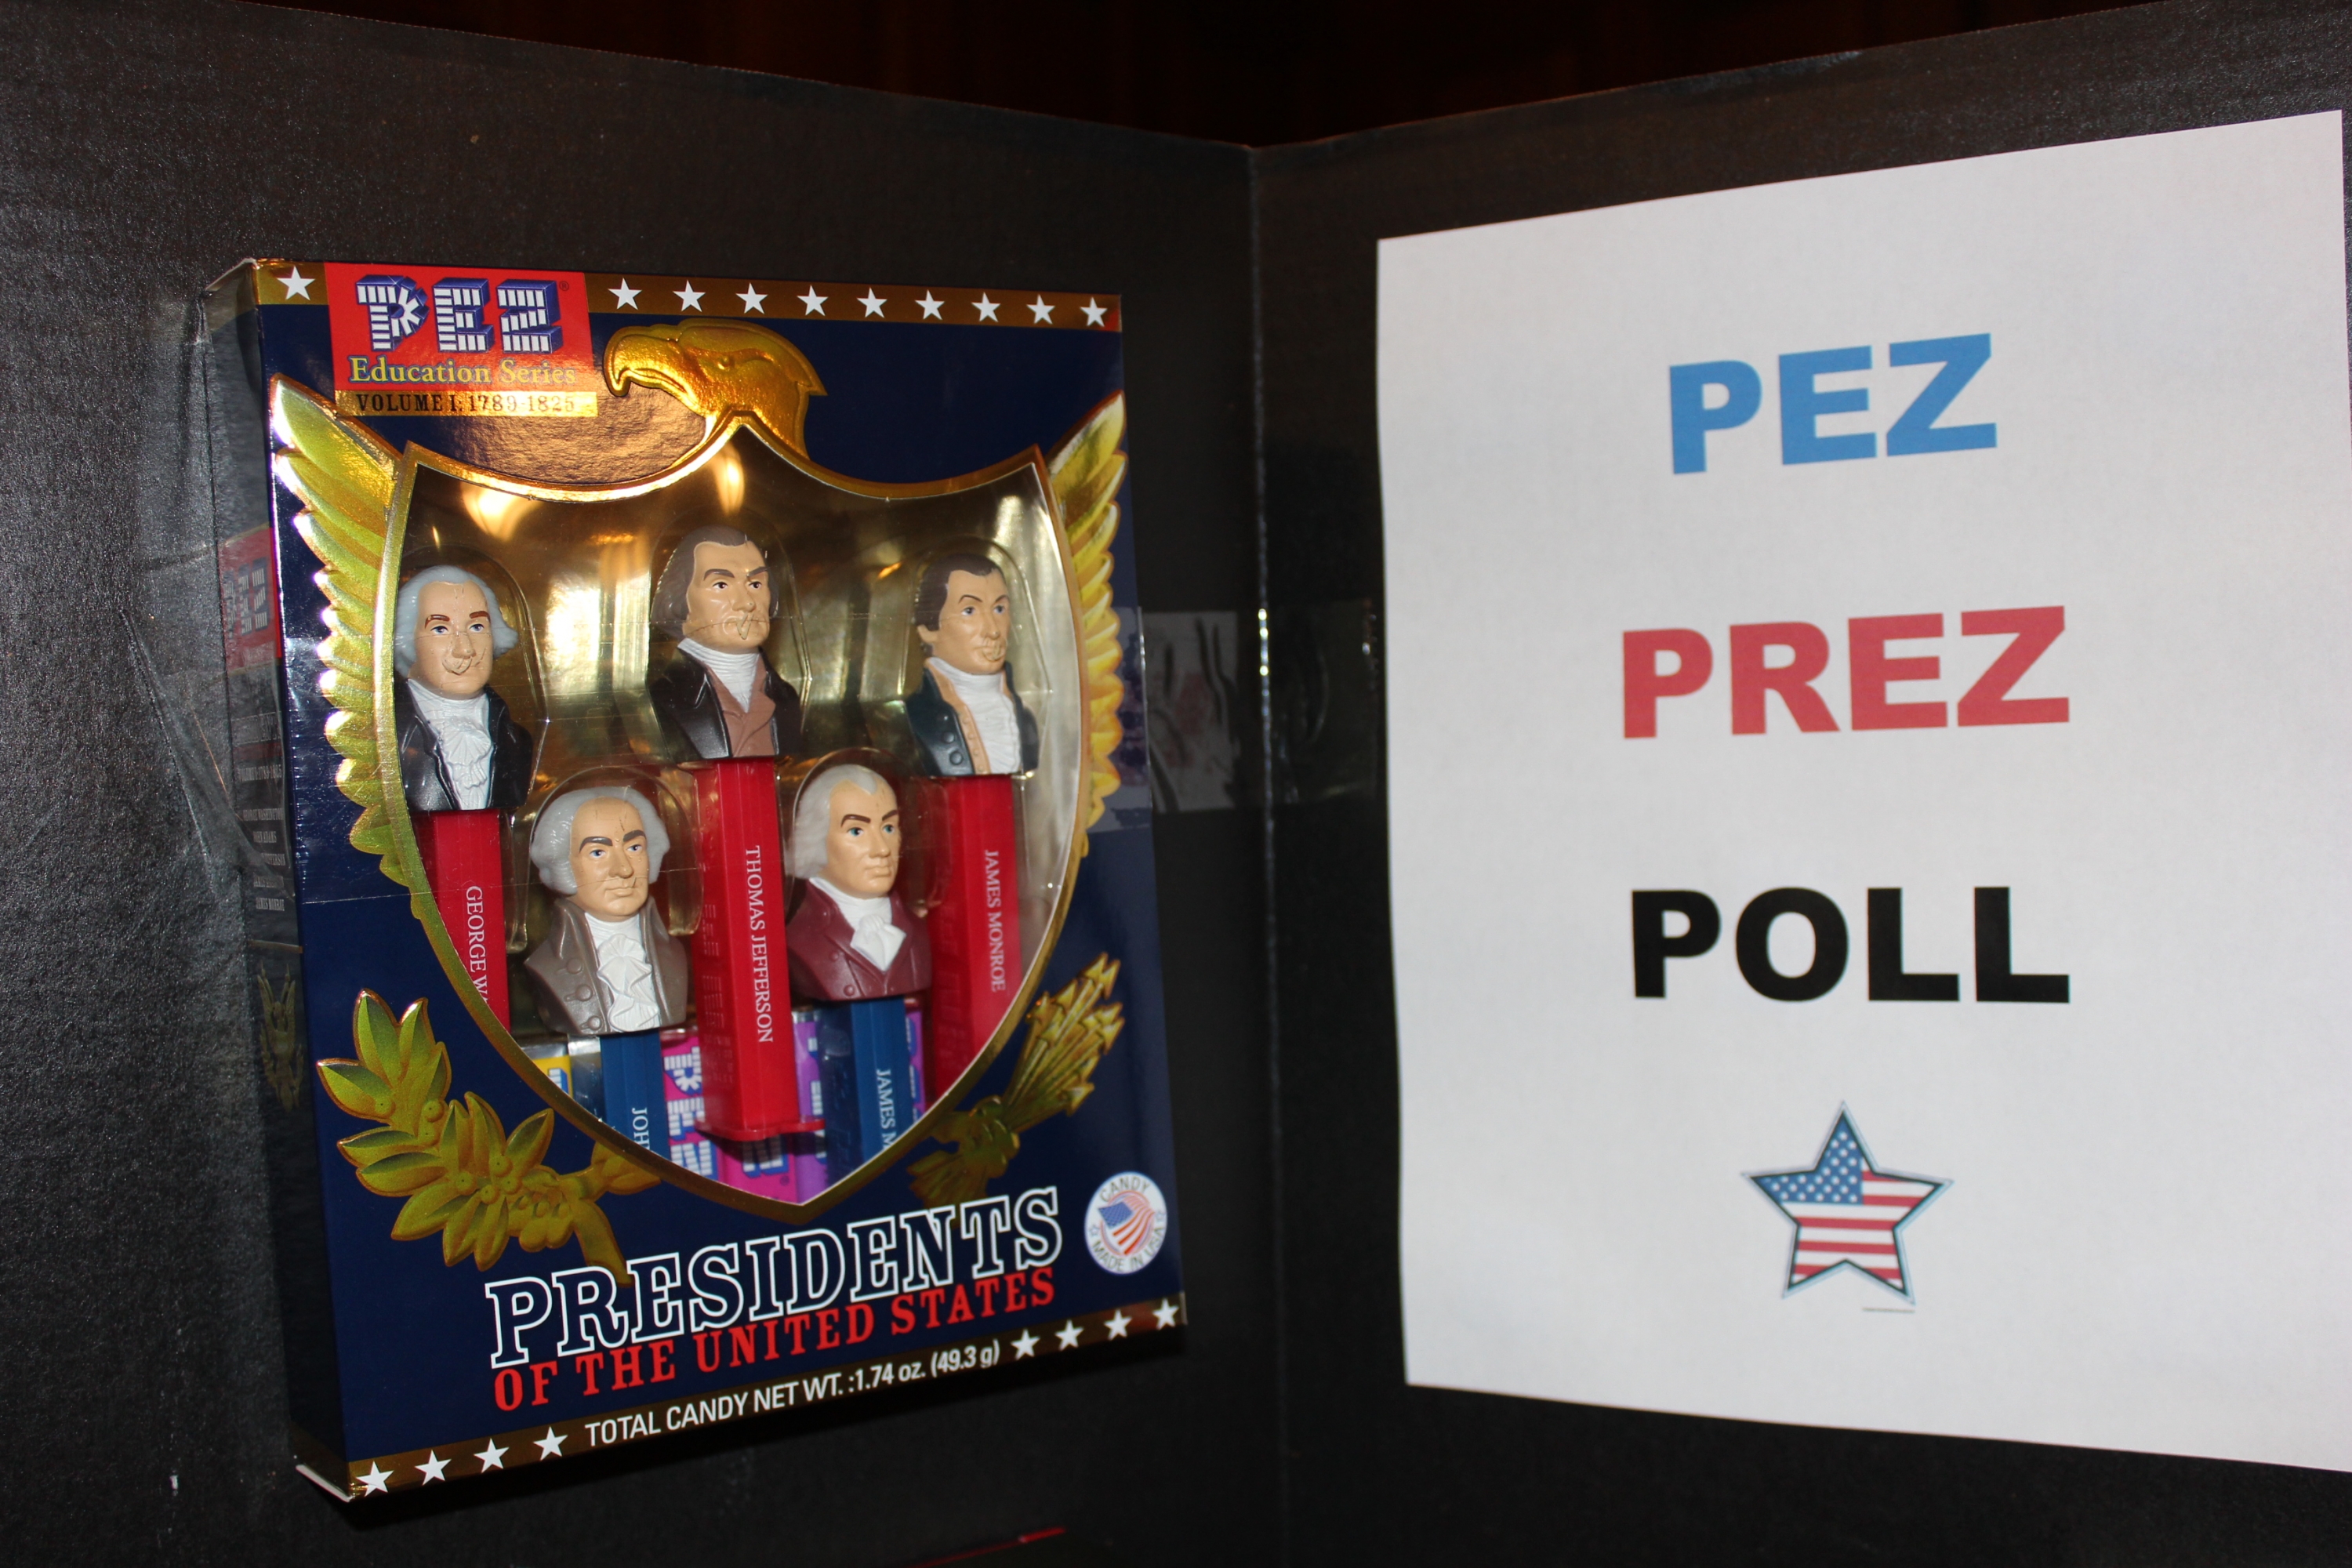 The presidential Pez poll, which debuted during SPSA's Election Palooza event during primary season, makes its much-anticipated return. Photo credit: Marilee Gallagher '14 